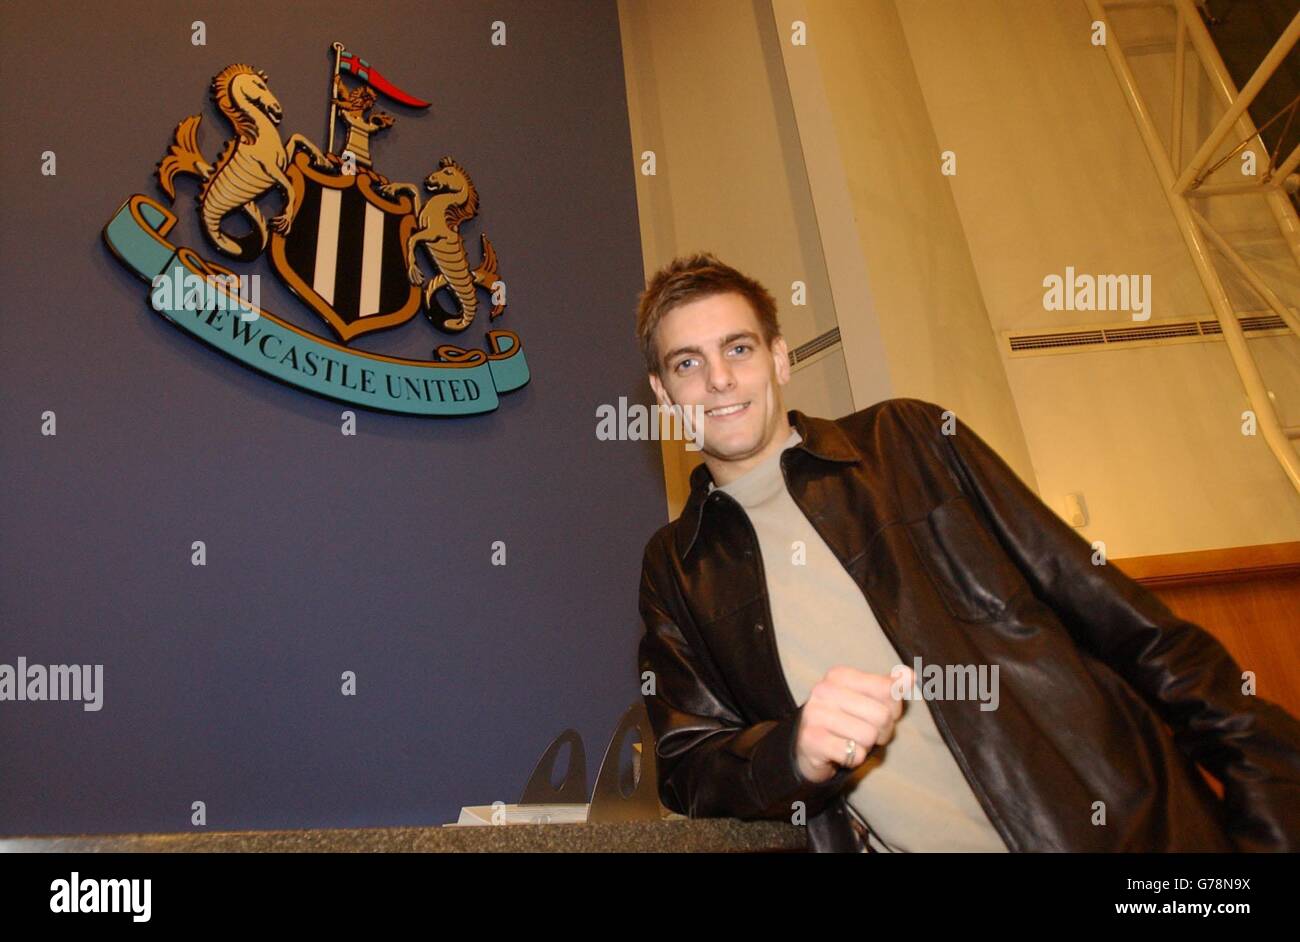 Former Leeds defender Jonathan Woodgate arriving at Newcastle United's St James's Park football ground. Stock Photo